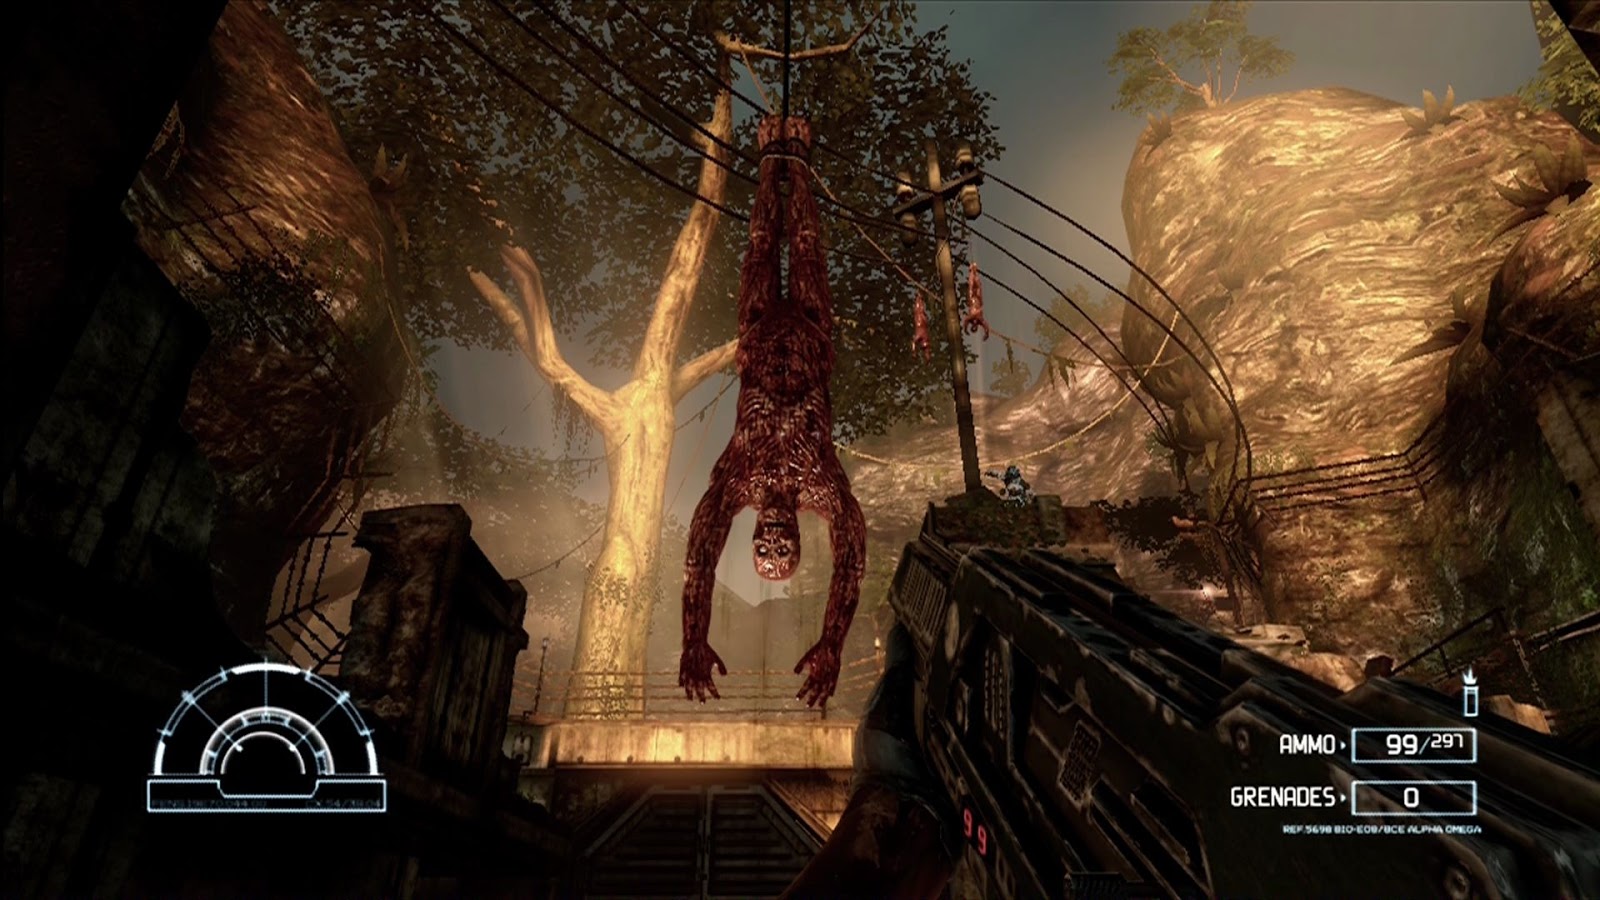 Bristolian Gamer: Shellshock 2: Blood Trails Review - Napalm can't